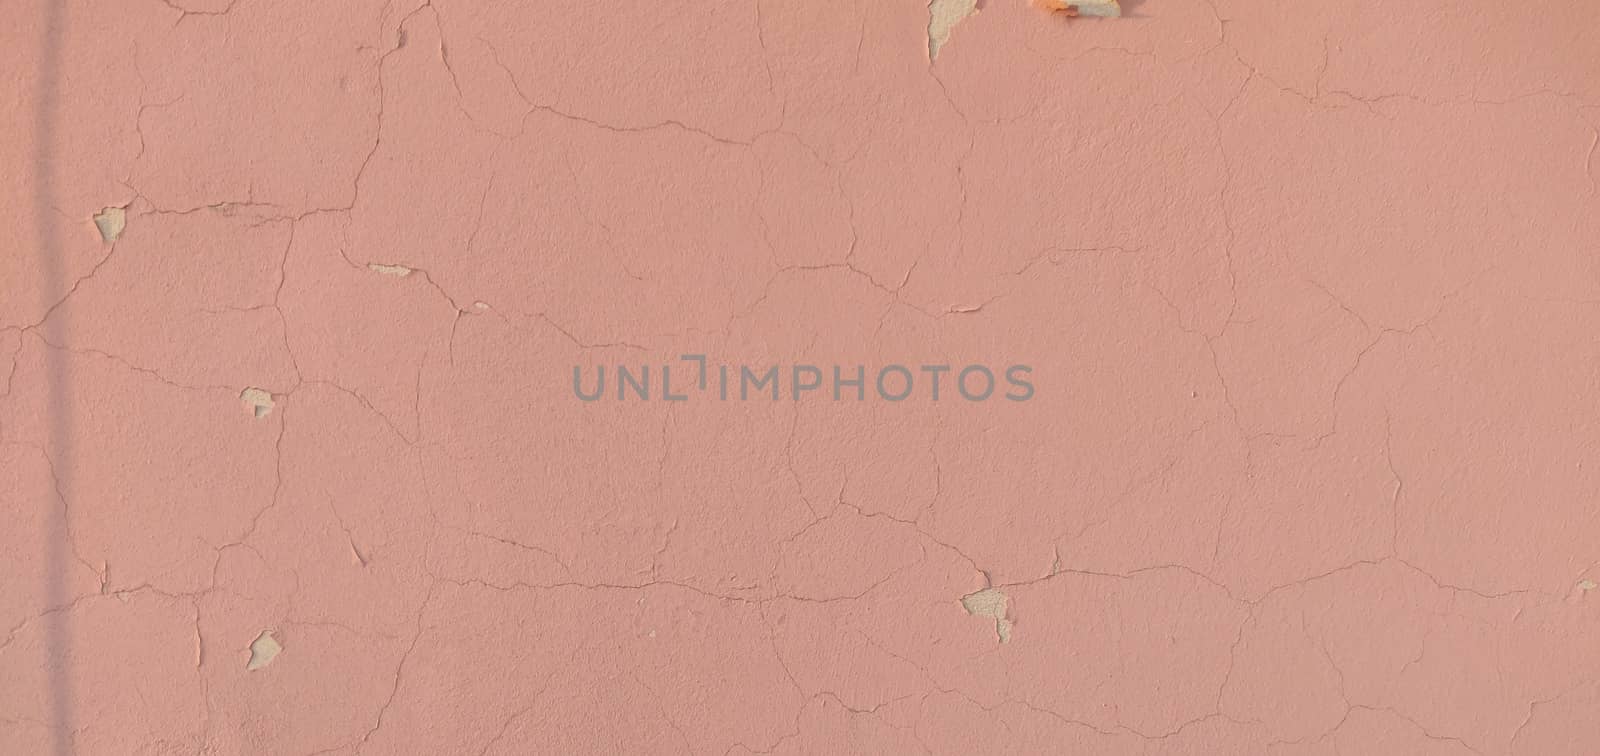 texture ruined pink wall